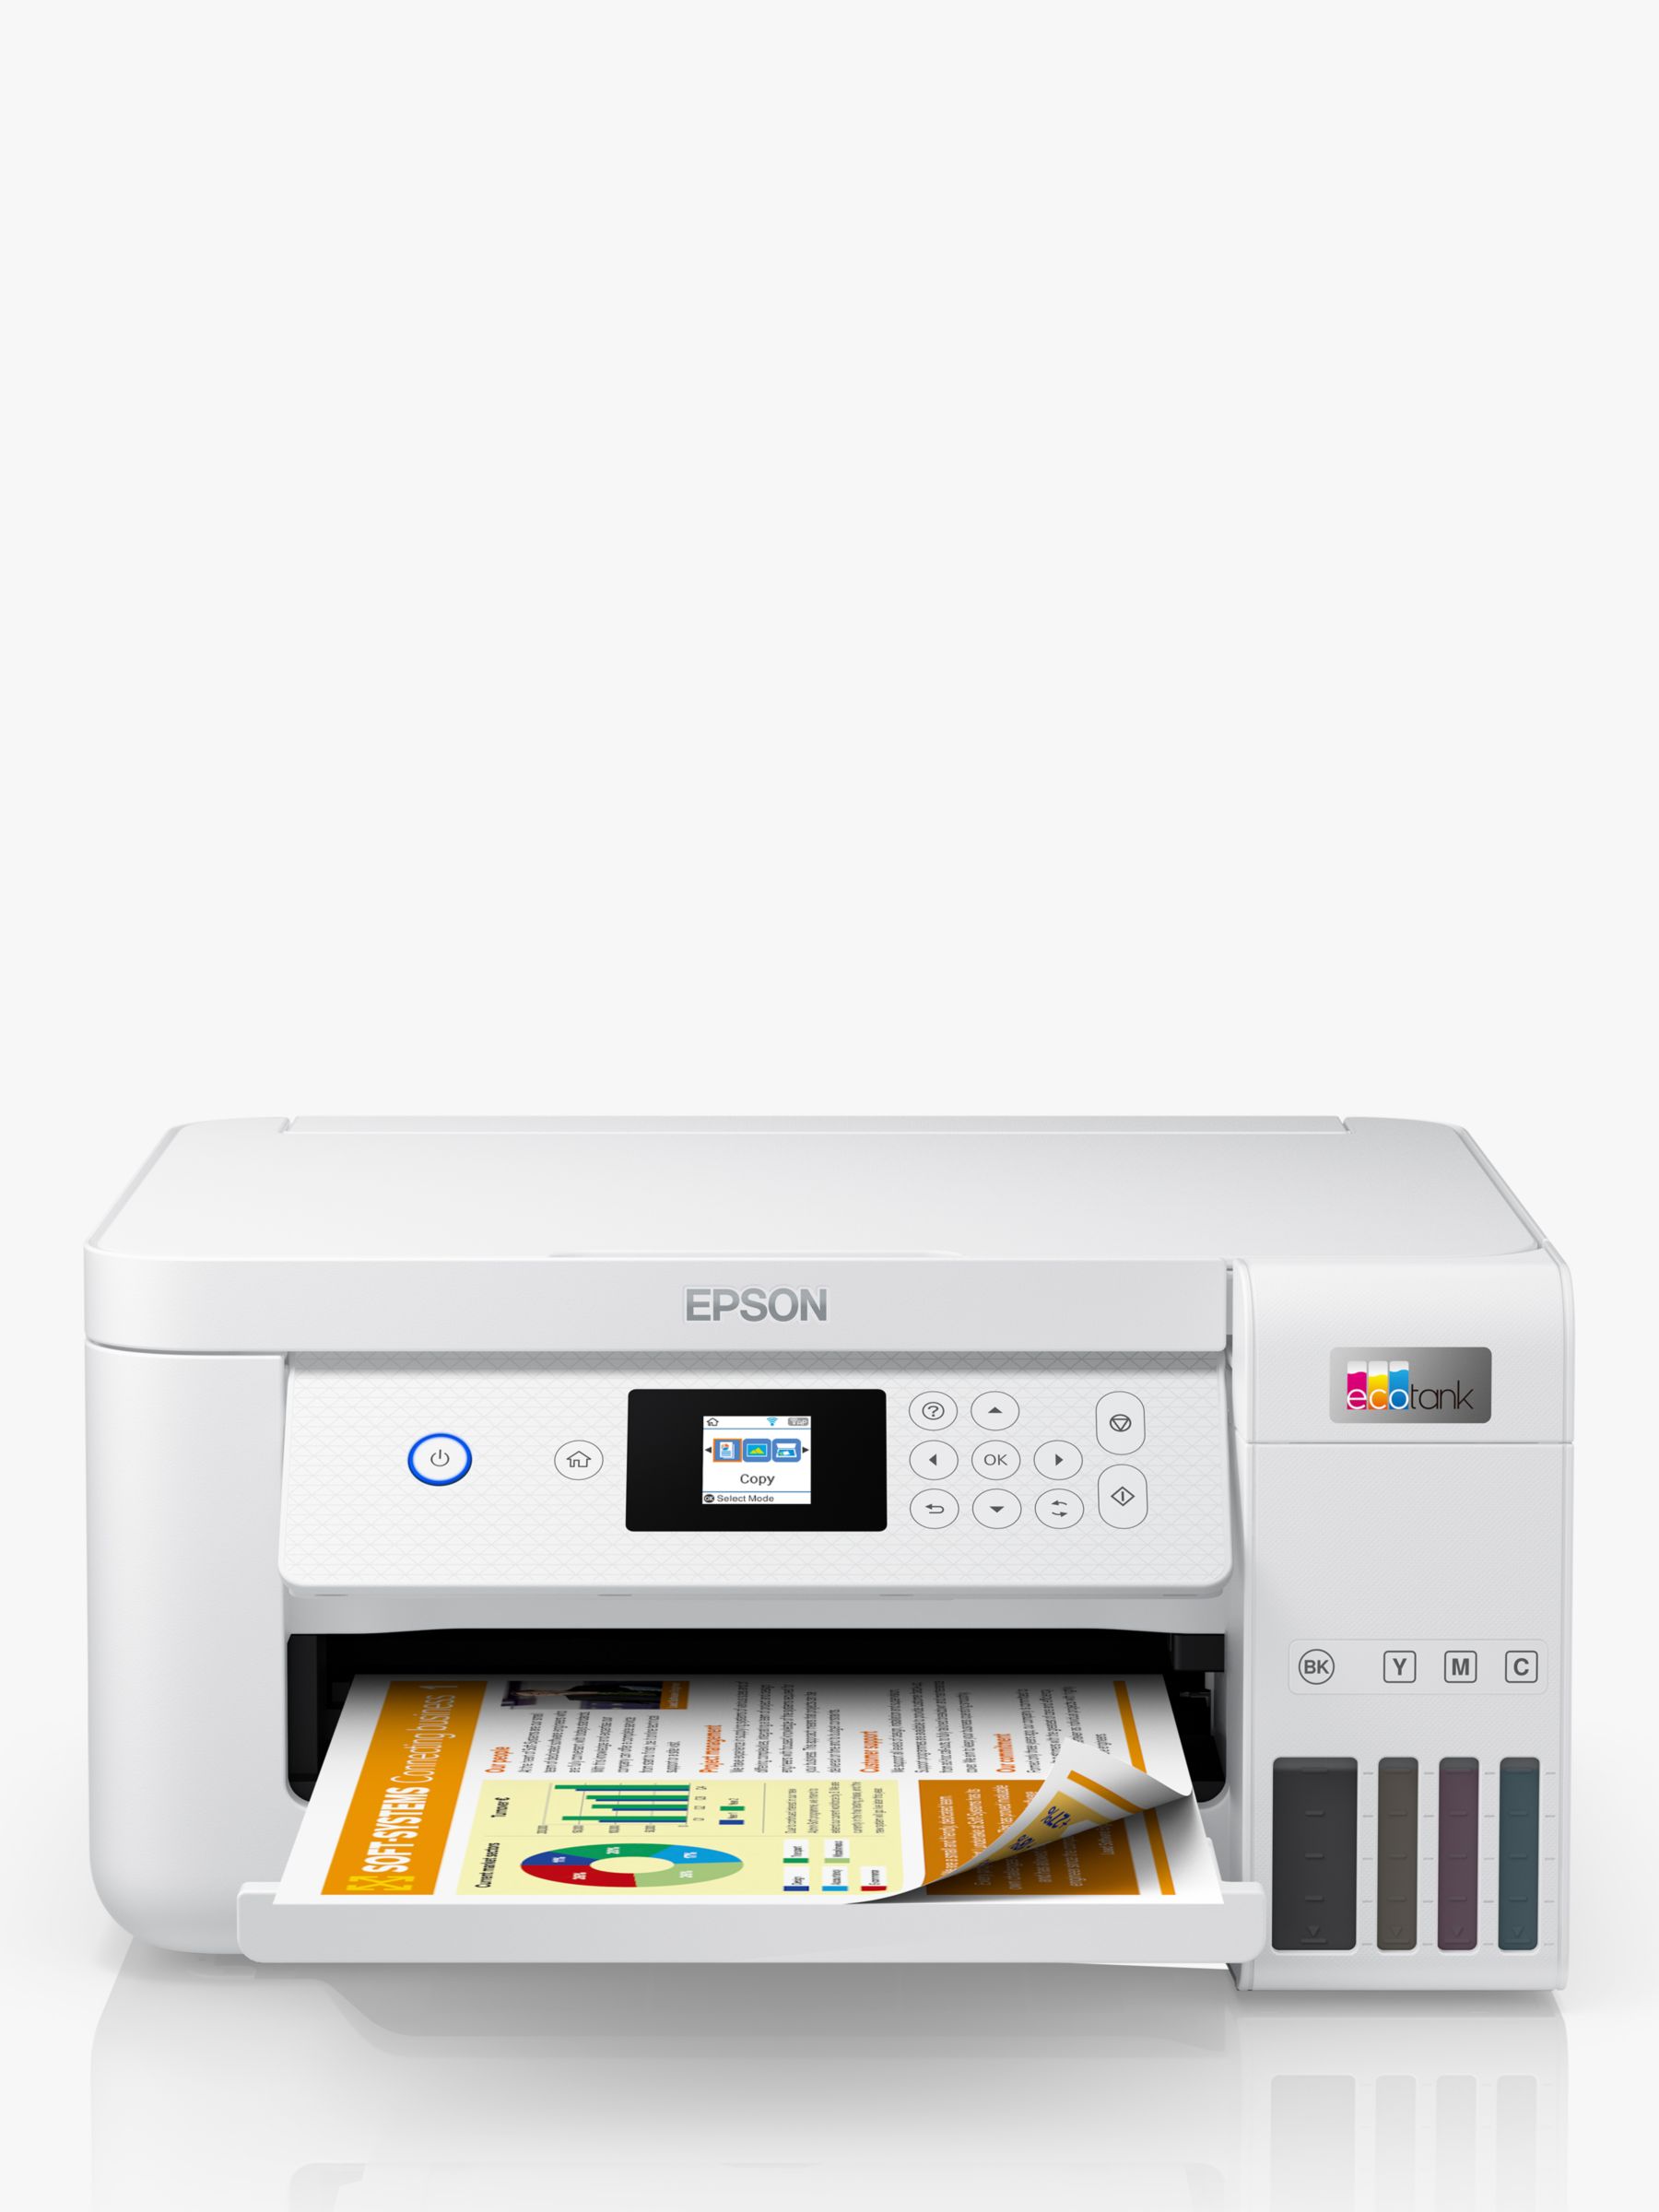 Epson EcoTank ET-2856 Three-In-One Wi-Fi Printer with High Capacity Integrated Ink Tank System, White Epson EcoTank ET-2856 Three-In-One Wi-Fi Printer with High Capacity Integrated Ink Tank System, White Epson EcoTank ET-2856 Three-In-One Wi-Fi Printer with High Capacity Integrated Ink Tank System, White Epson EcoTank ET-2856 Three-In-One Wi-Fi Printer with High Capacity Integrated Ink Tank System, White Epson EcoTank ET-2856 Three-In-One Wi-Fi Printer with High Capacity Integrated Ink Tank System, White Epson EcoTank ET-2856 Three-In-One Wi-Fi Printer with High Capacity Integrated Ink Tank System, White Epson EcoTank ET-2856 Three-In-One Wi-Fi Printer with High Capacity Integrated Ink Tank System, White Epson EcoTank ET-2856 Three-In-One Wi-Fi Printer with High Capacity Integrated Ink Tank System, White Epson EcoTank ET-2856 Three-In-One Wi-Fi Printer with High Capacity Integrated Ink Tank System, White  STYLE INSPIRATION Share how you styled this product and feature on our website. Simply mention @johnlewis in your Instagram or upload a photo.  Share your look Epson EcoTank ET-2856 Three-In-One Wi-Fi Printer with High Capacity Integrated Ink Tank System